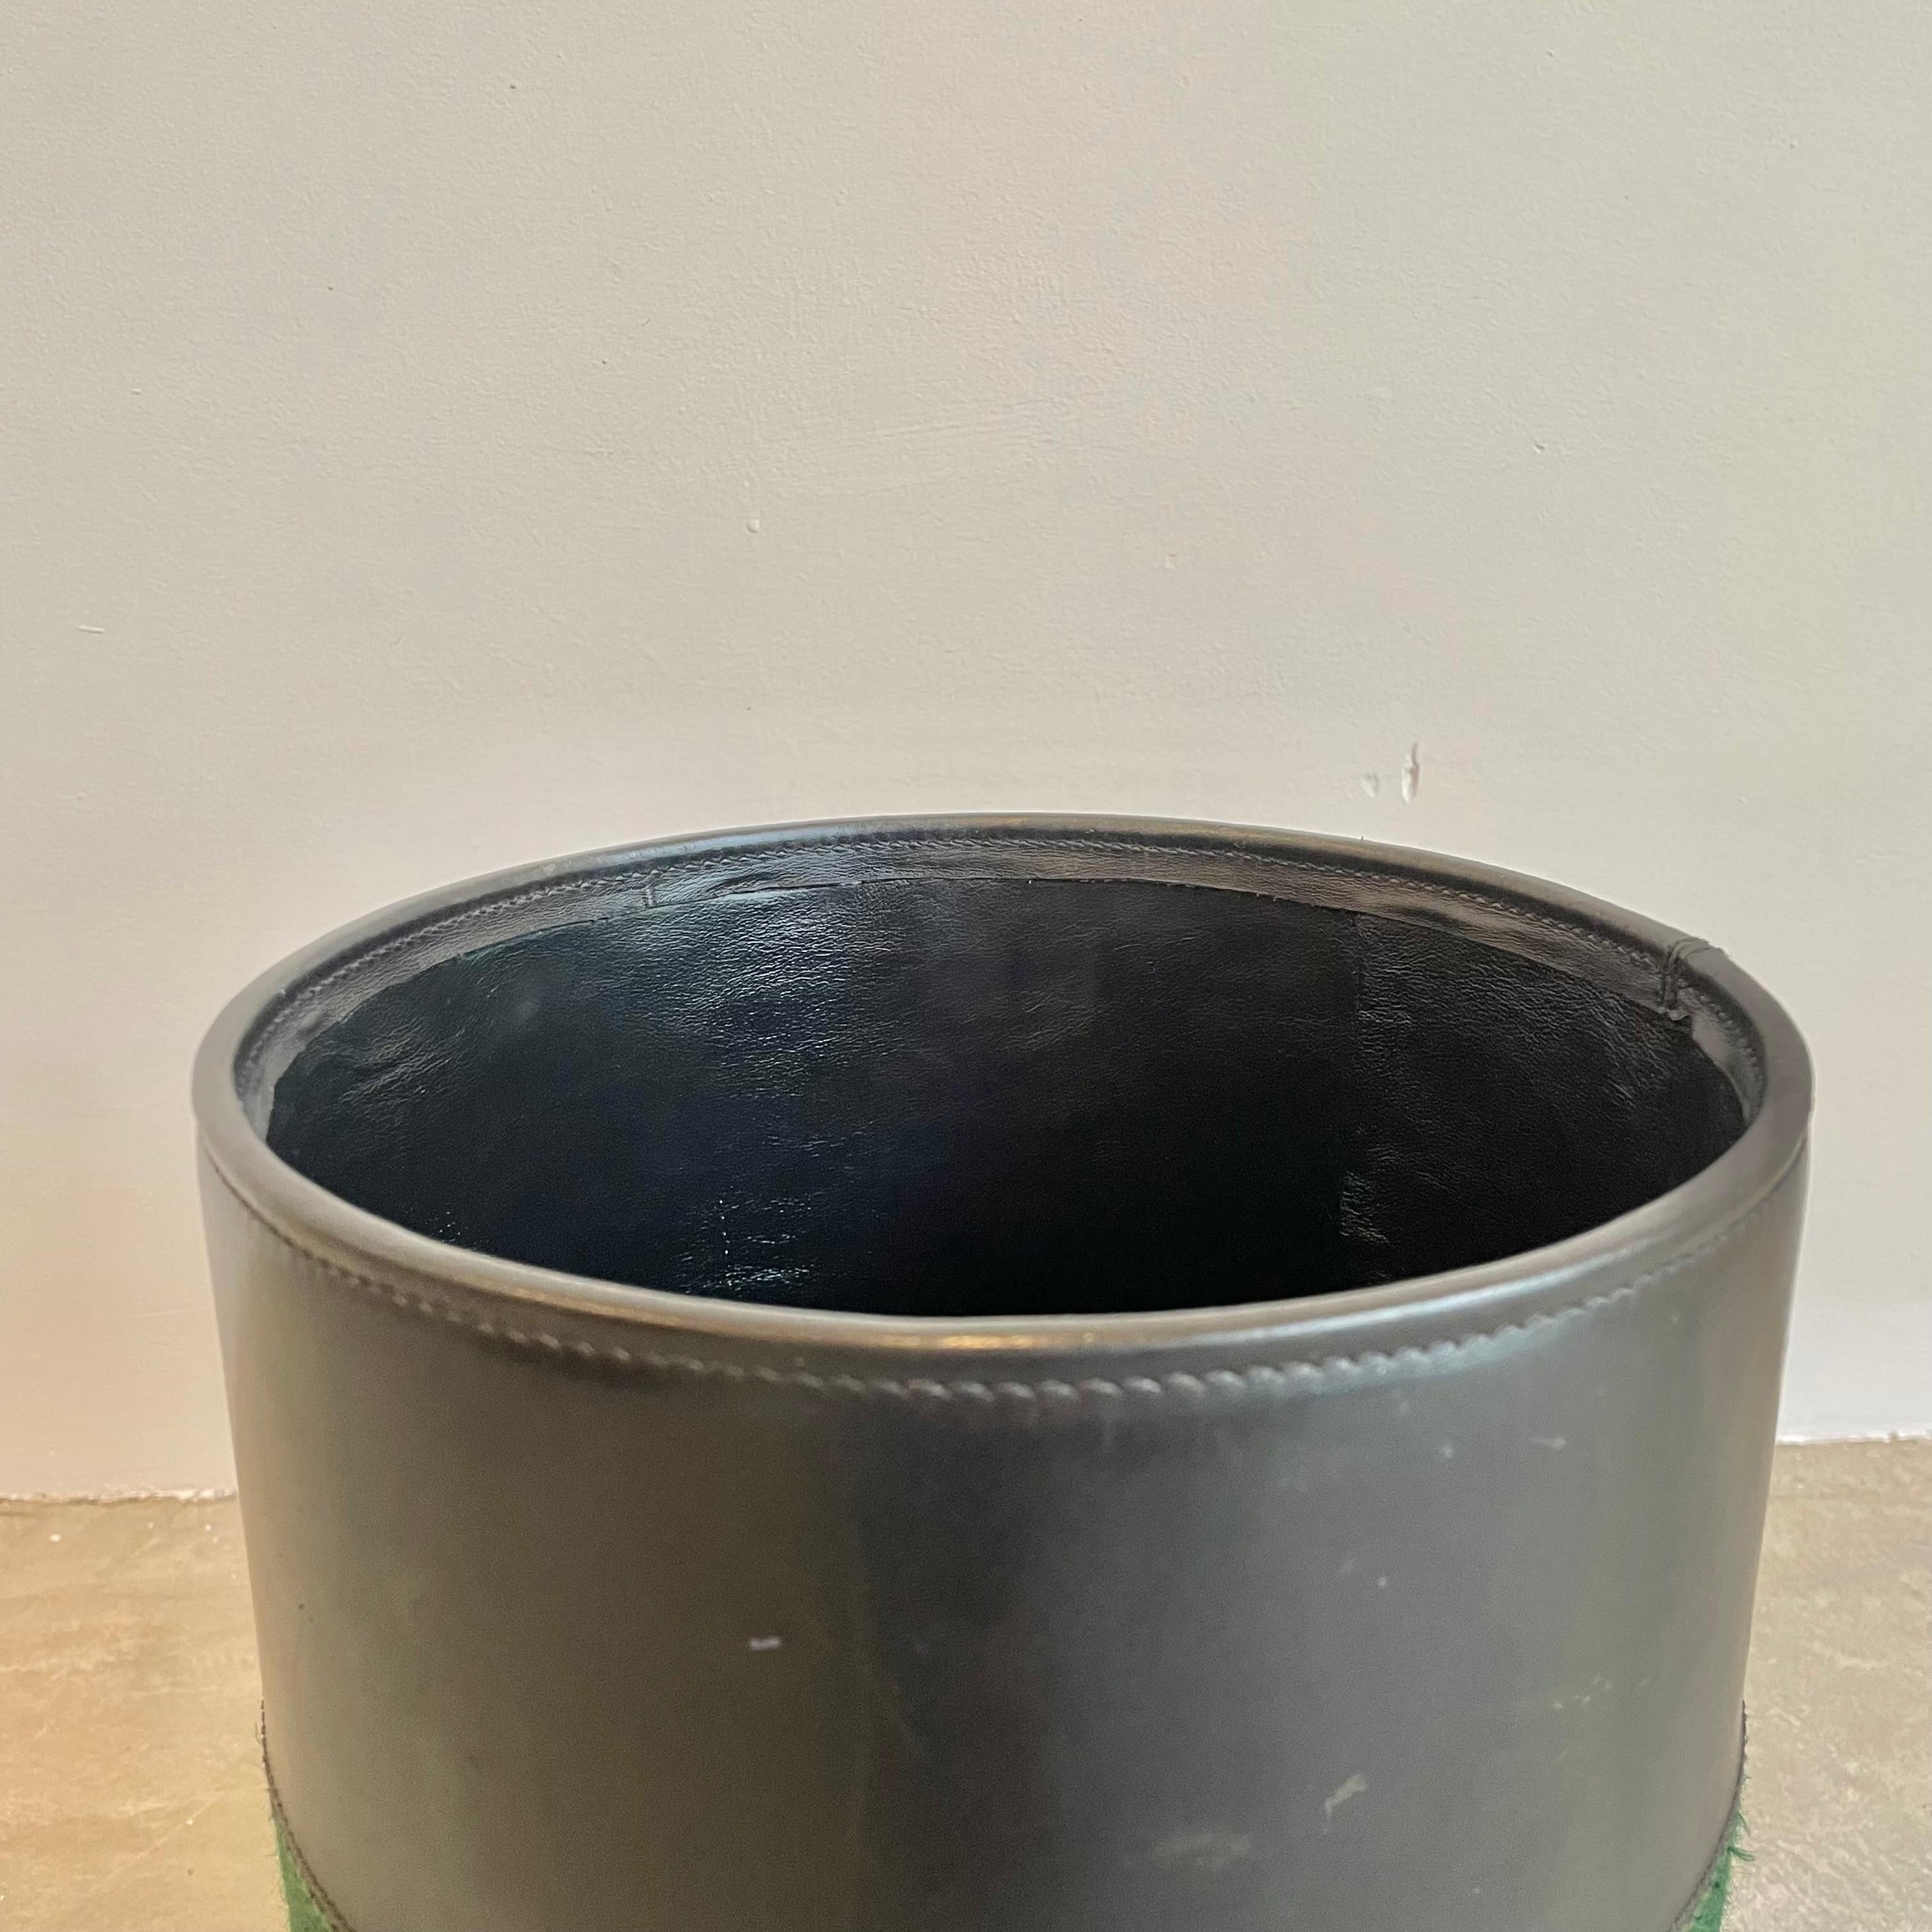 Gucci Black Leather Waste Basket, 1970s Italy 3